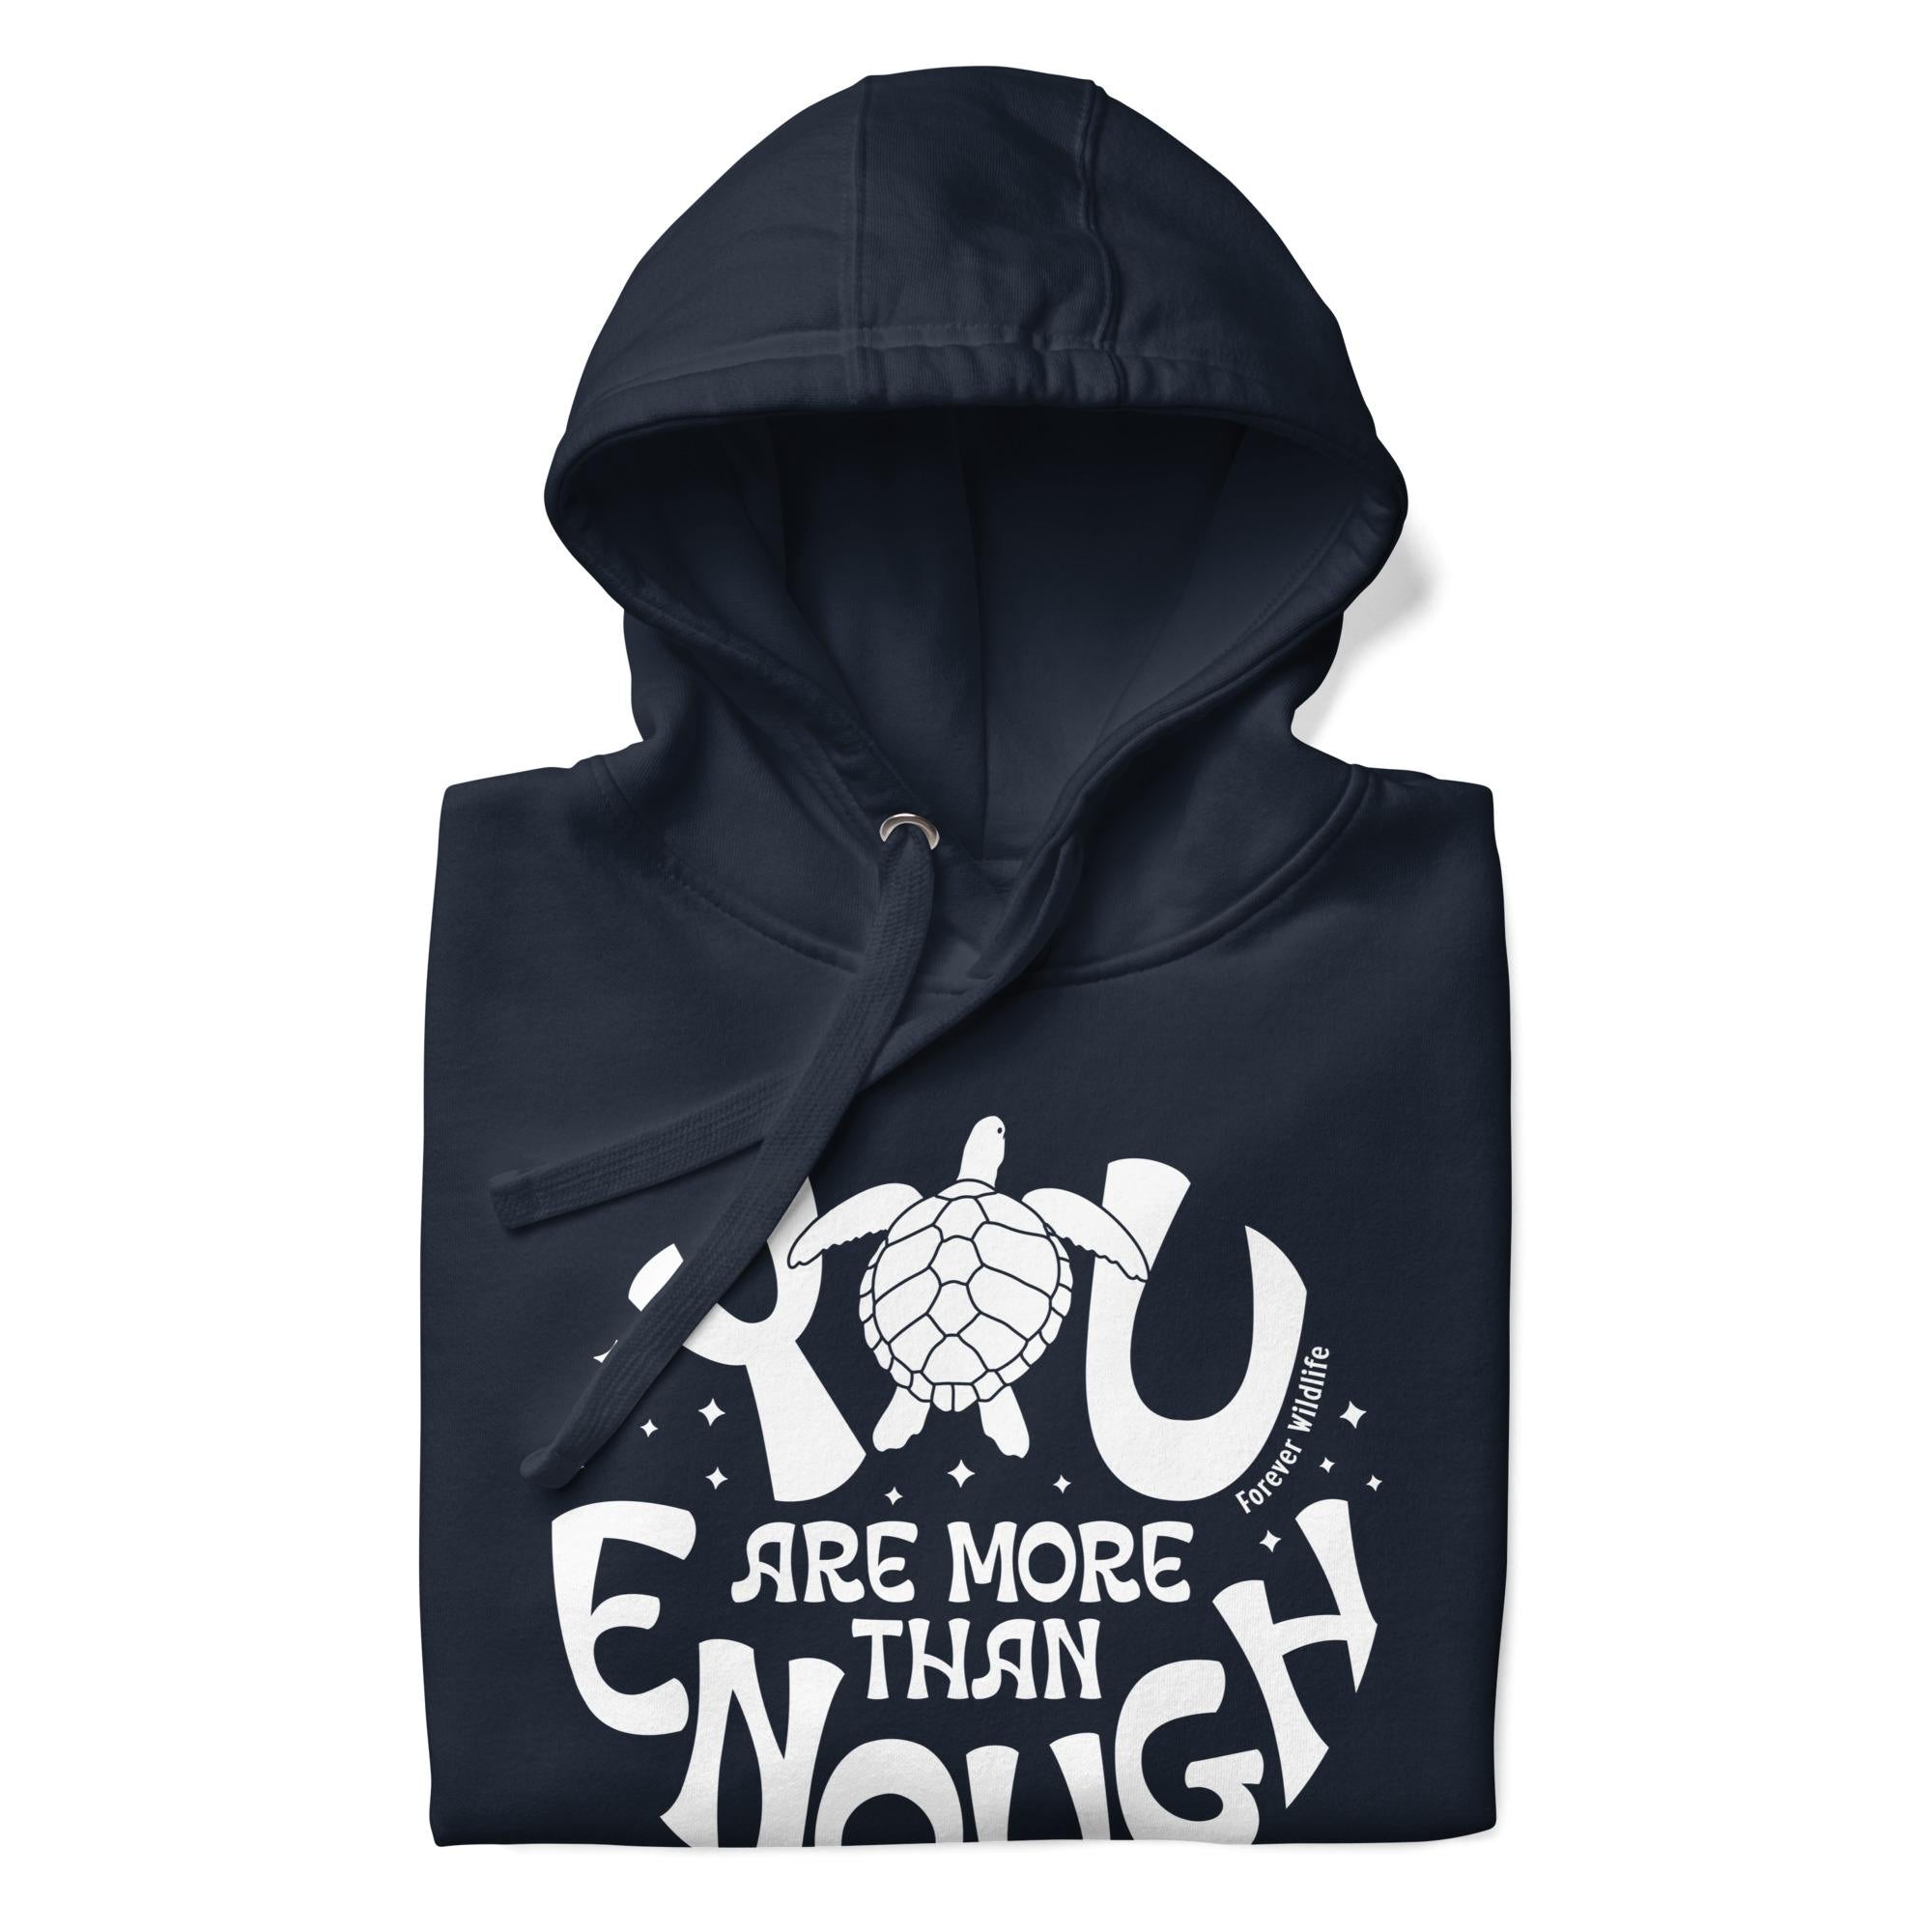 Sea Turtle Hoodie in Navy – Premium Wildlife Animal Inspirational Hoodie Design with YOu Are More Than Enough text, part of Wildlife Hoodies & Clothing from Forever Wildlife